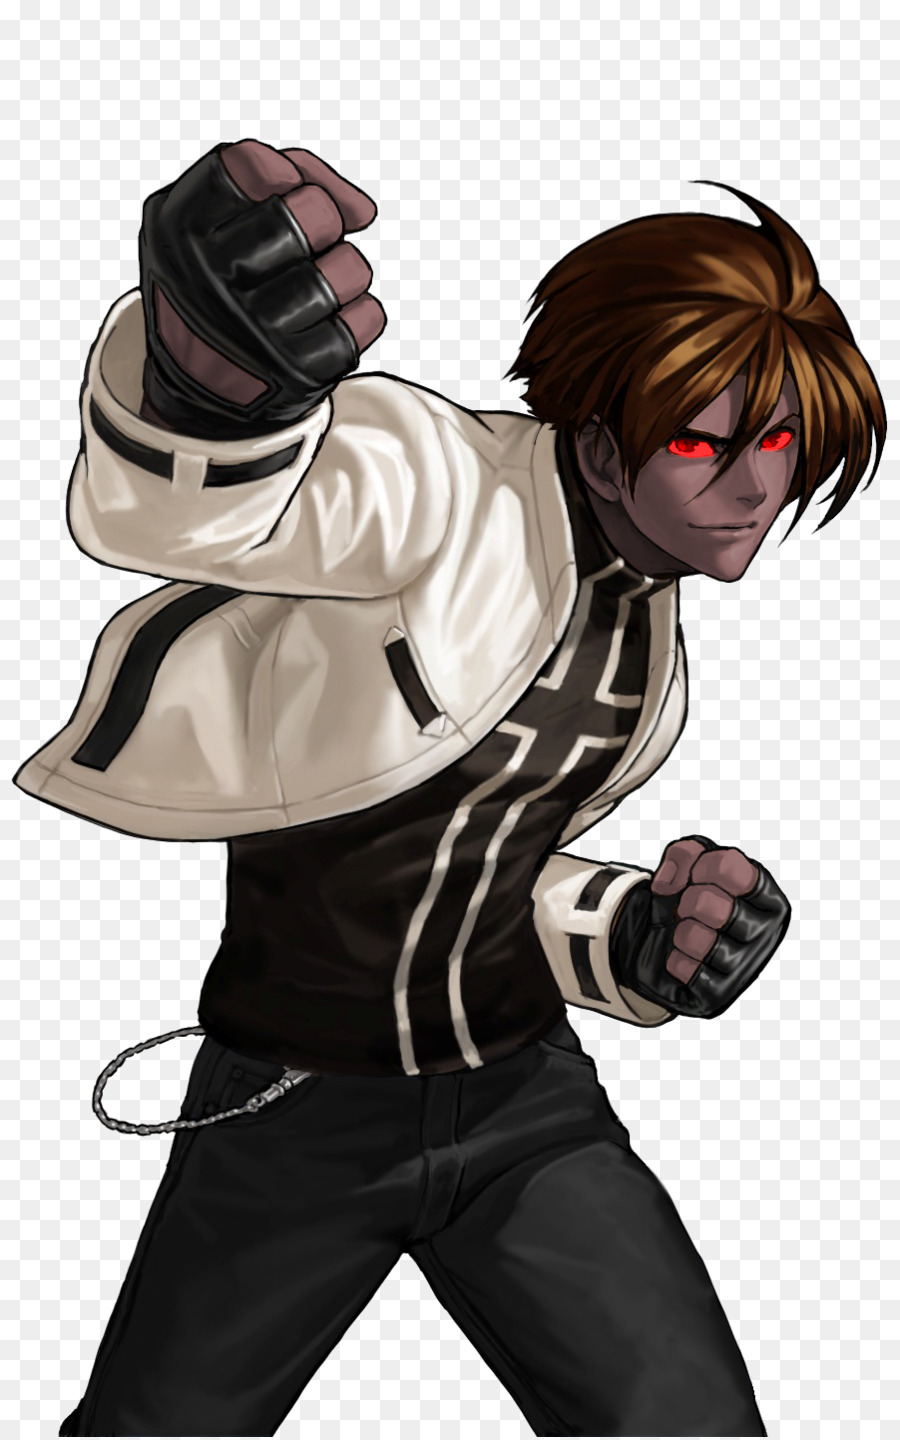 King Of Fighters Xiii，Kyo Kusanagi PNG